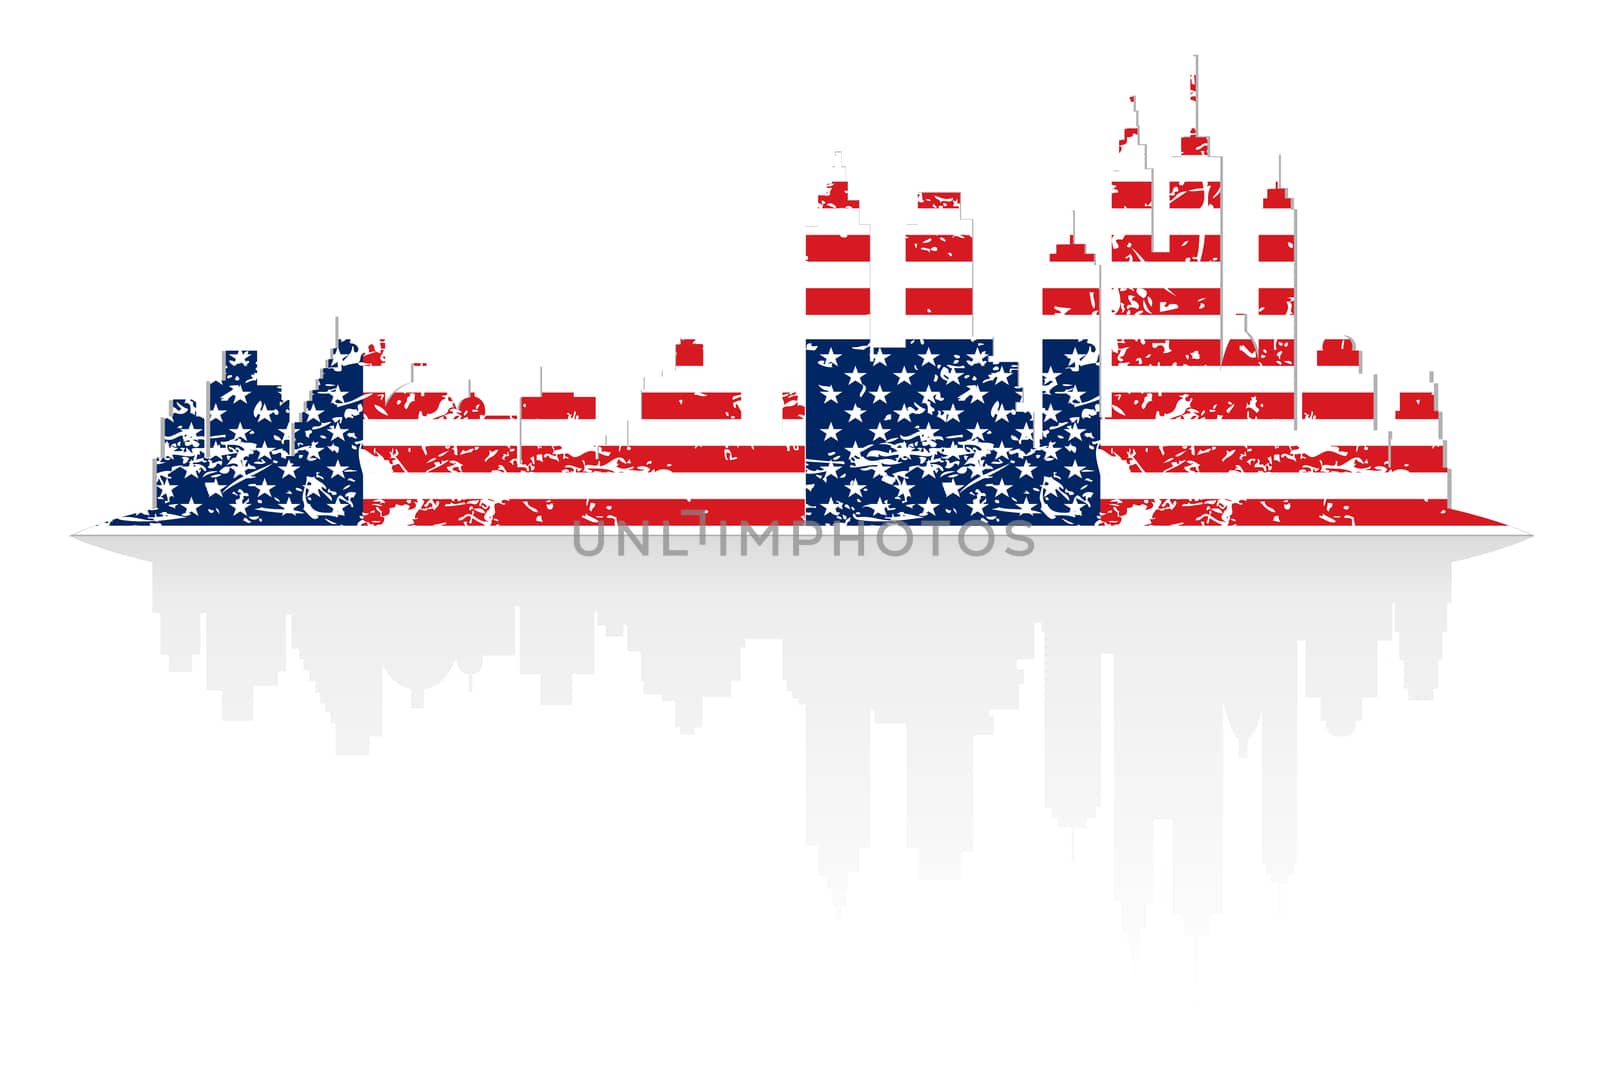 City skyline in colors of USA flag by hibrida13